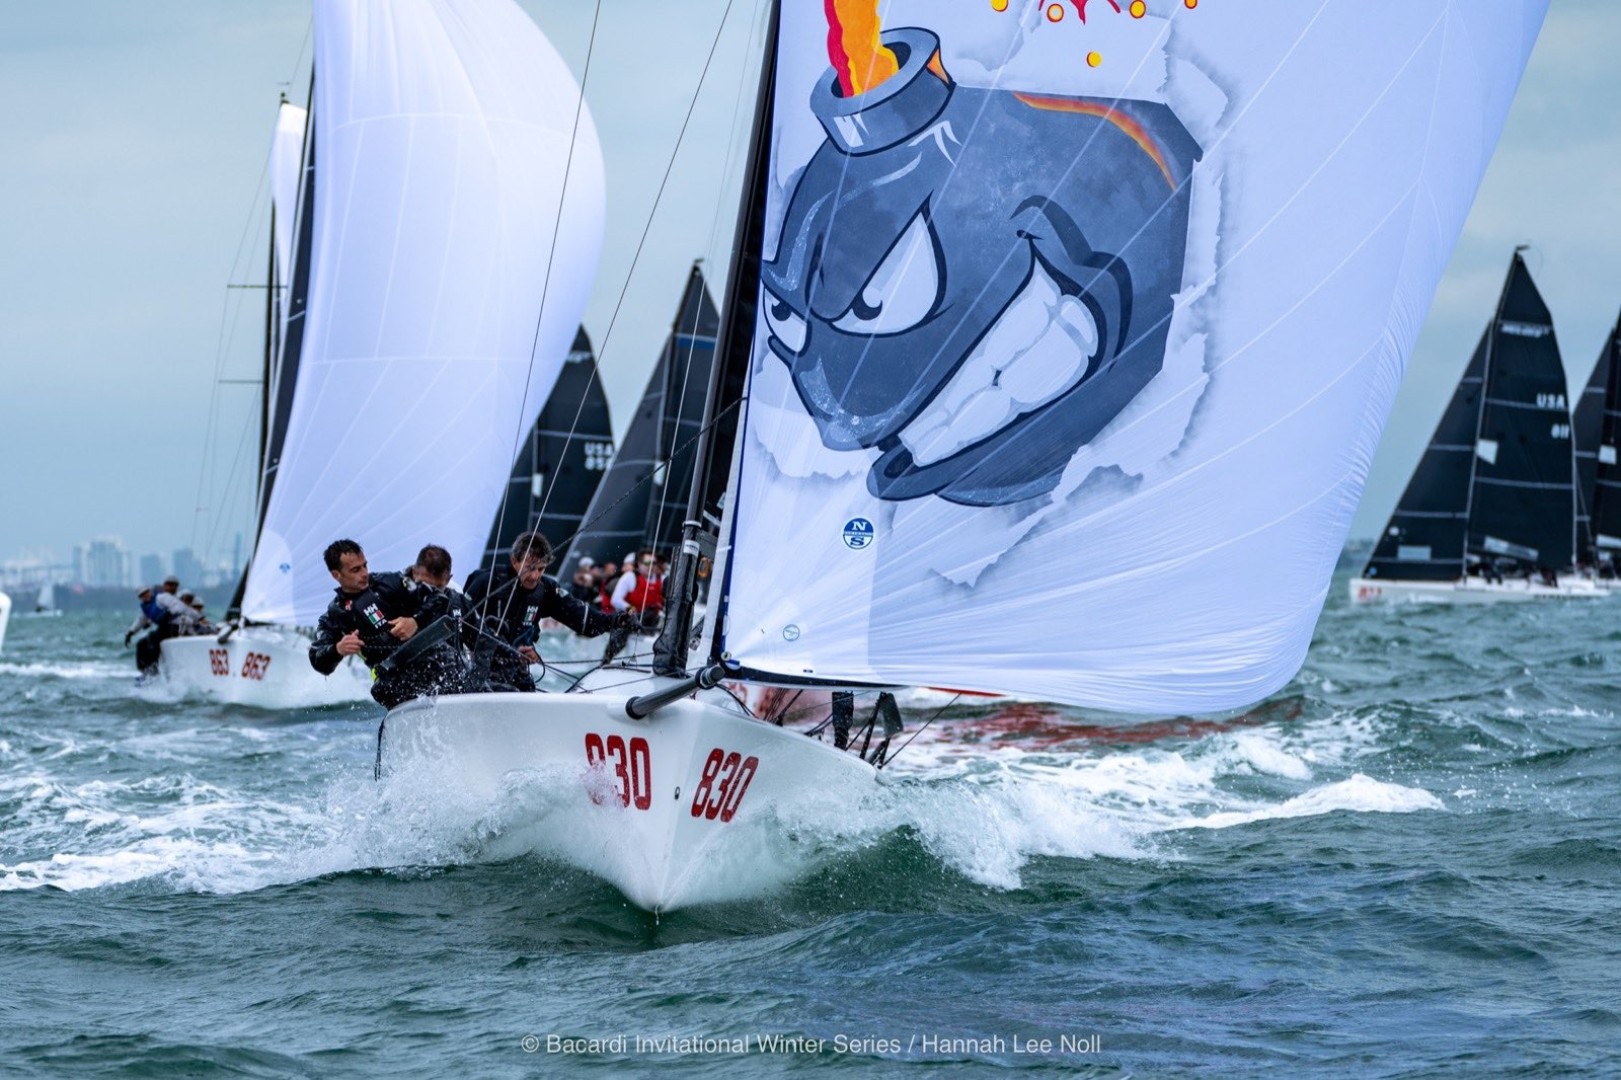 'Bombarda' leads the Melges 24 fleet after 3 races